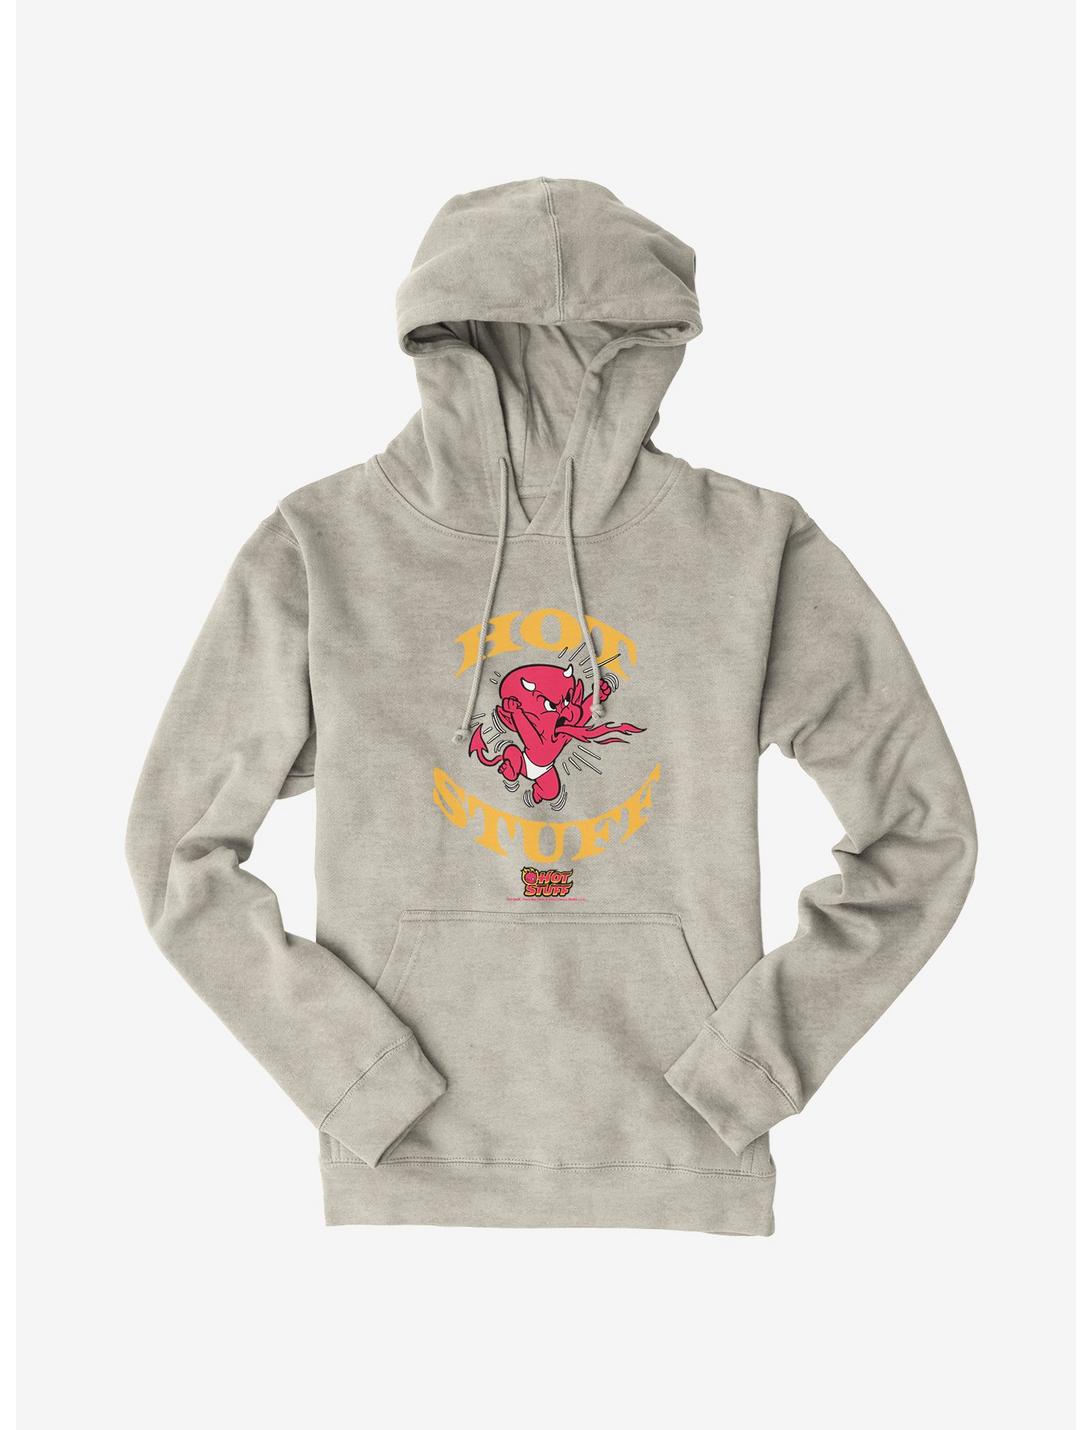 Hot Stuff The Little Devil Spitting Out Fire Hoodie, OATMEAL HEATHER, hi-res